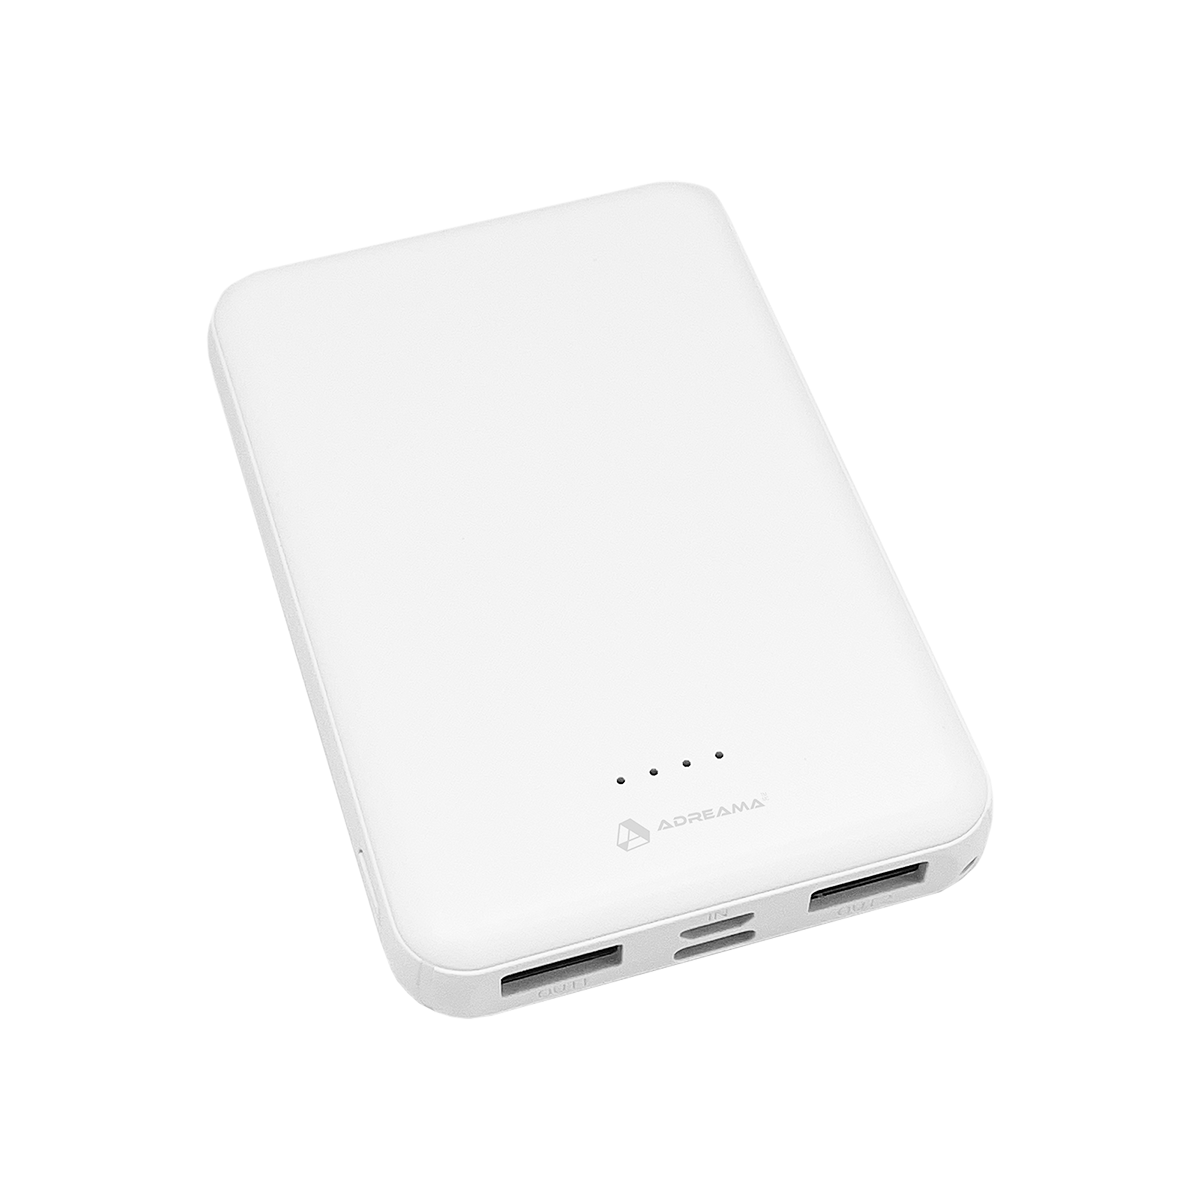 Stay Powered Up with the Adreama White 5000mAh Power Bank 10W